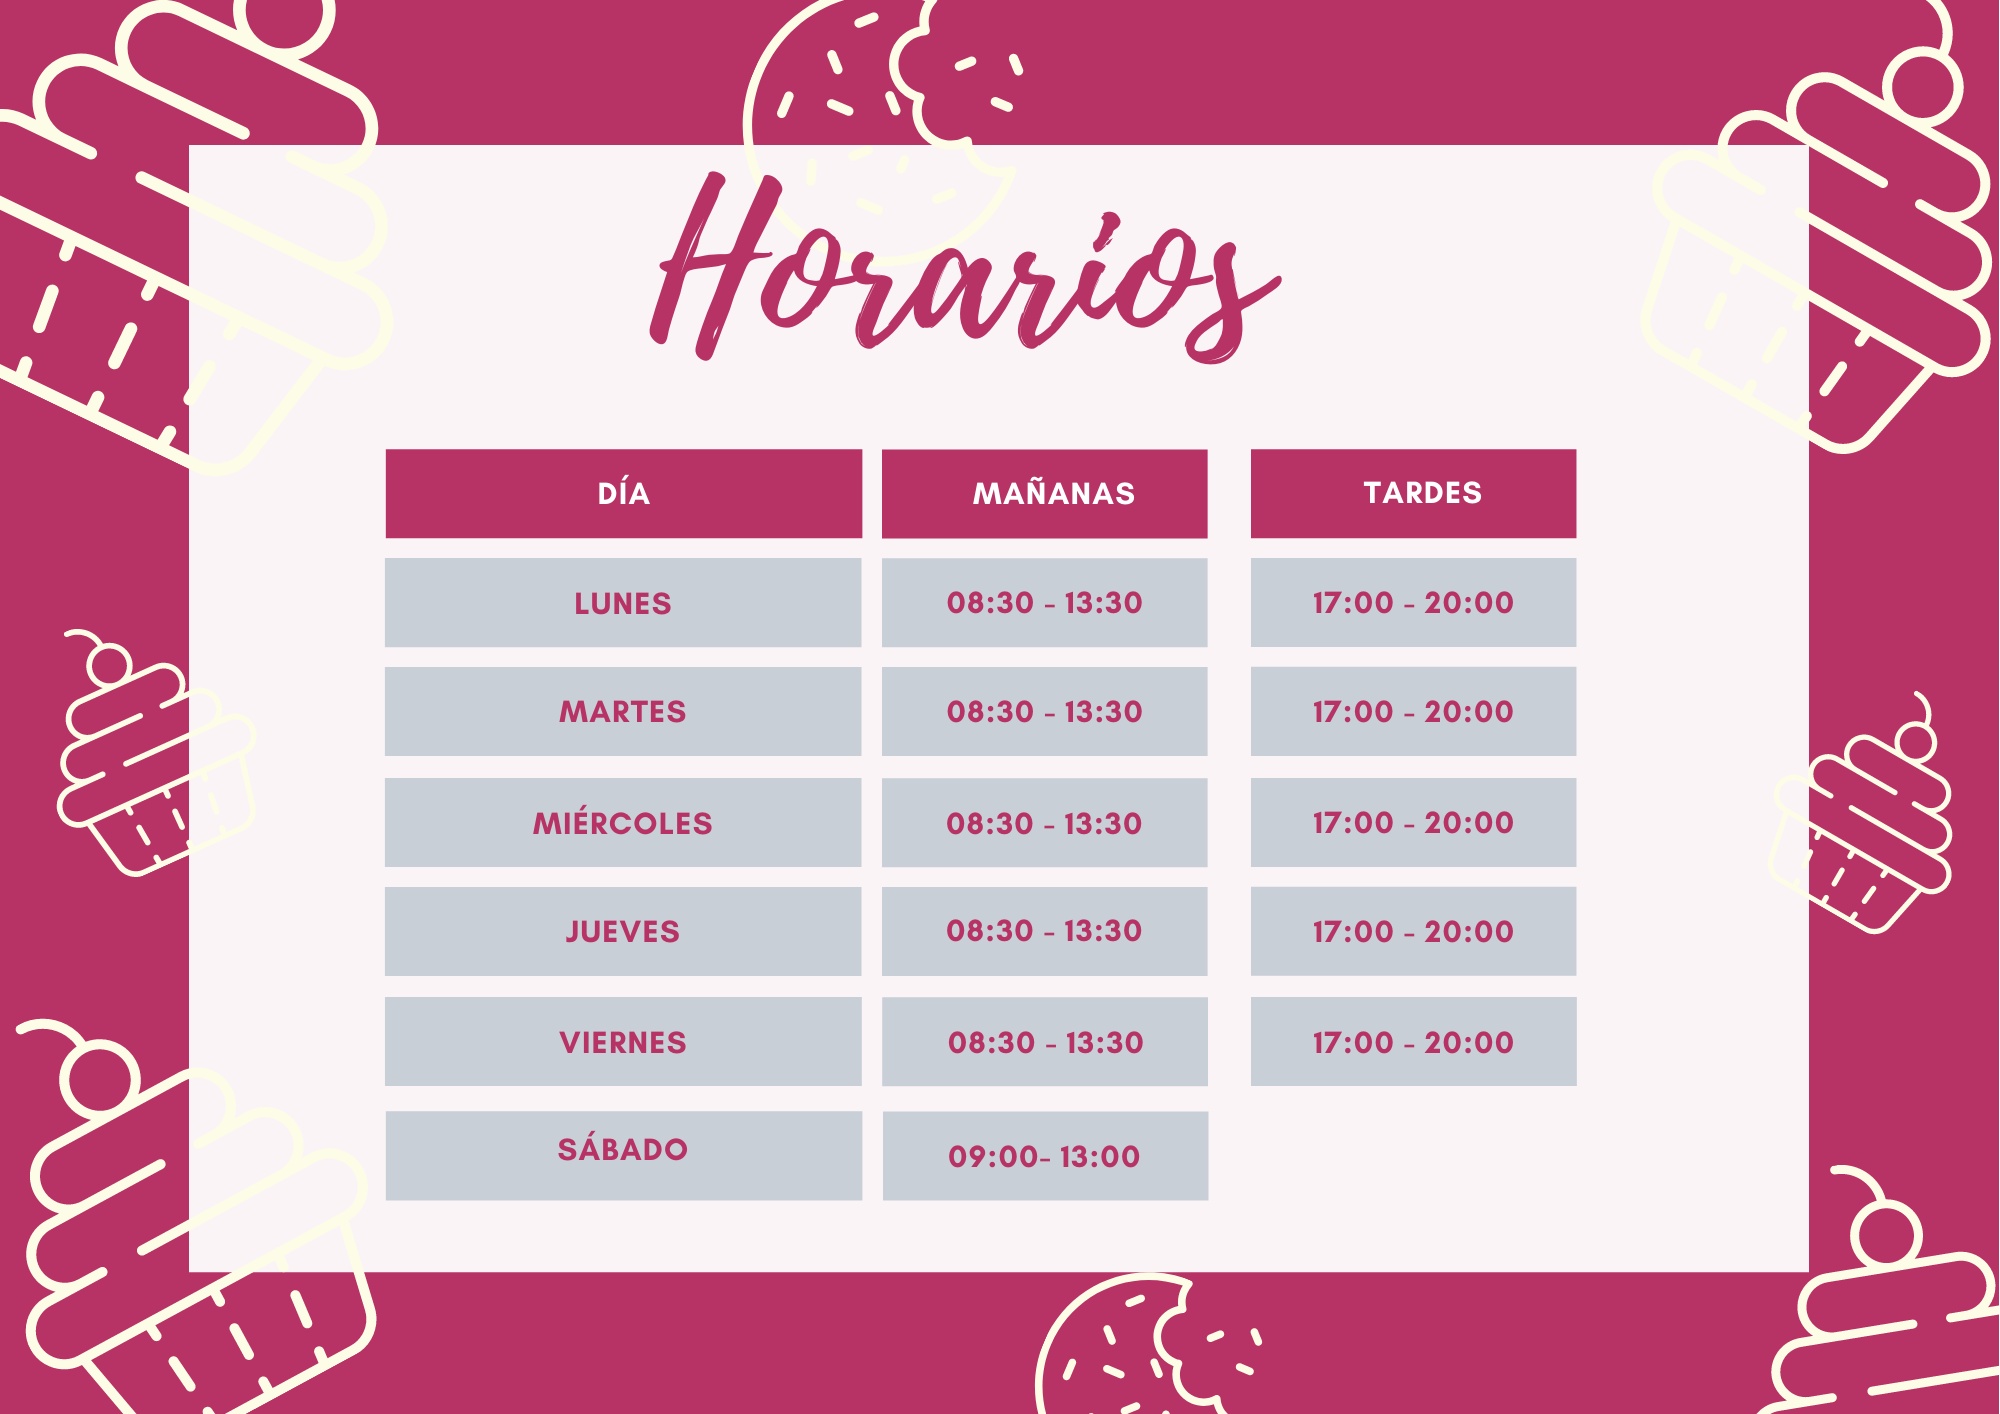 Mossets Horarios